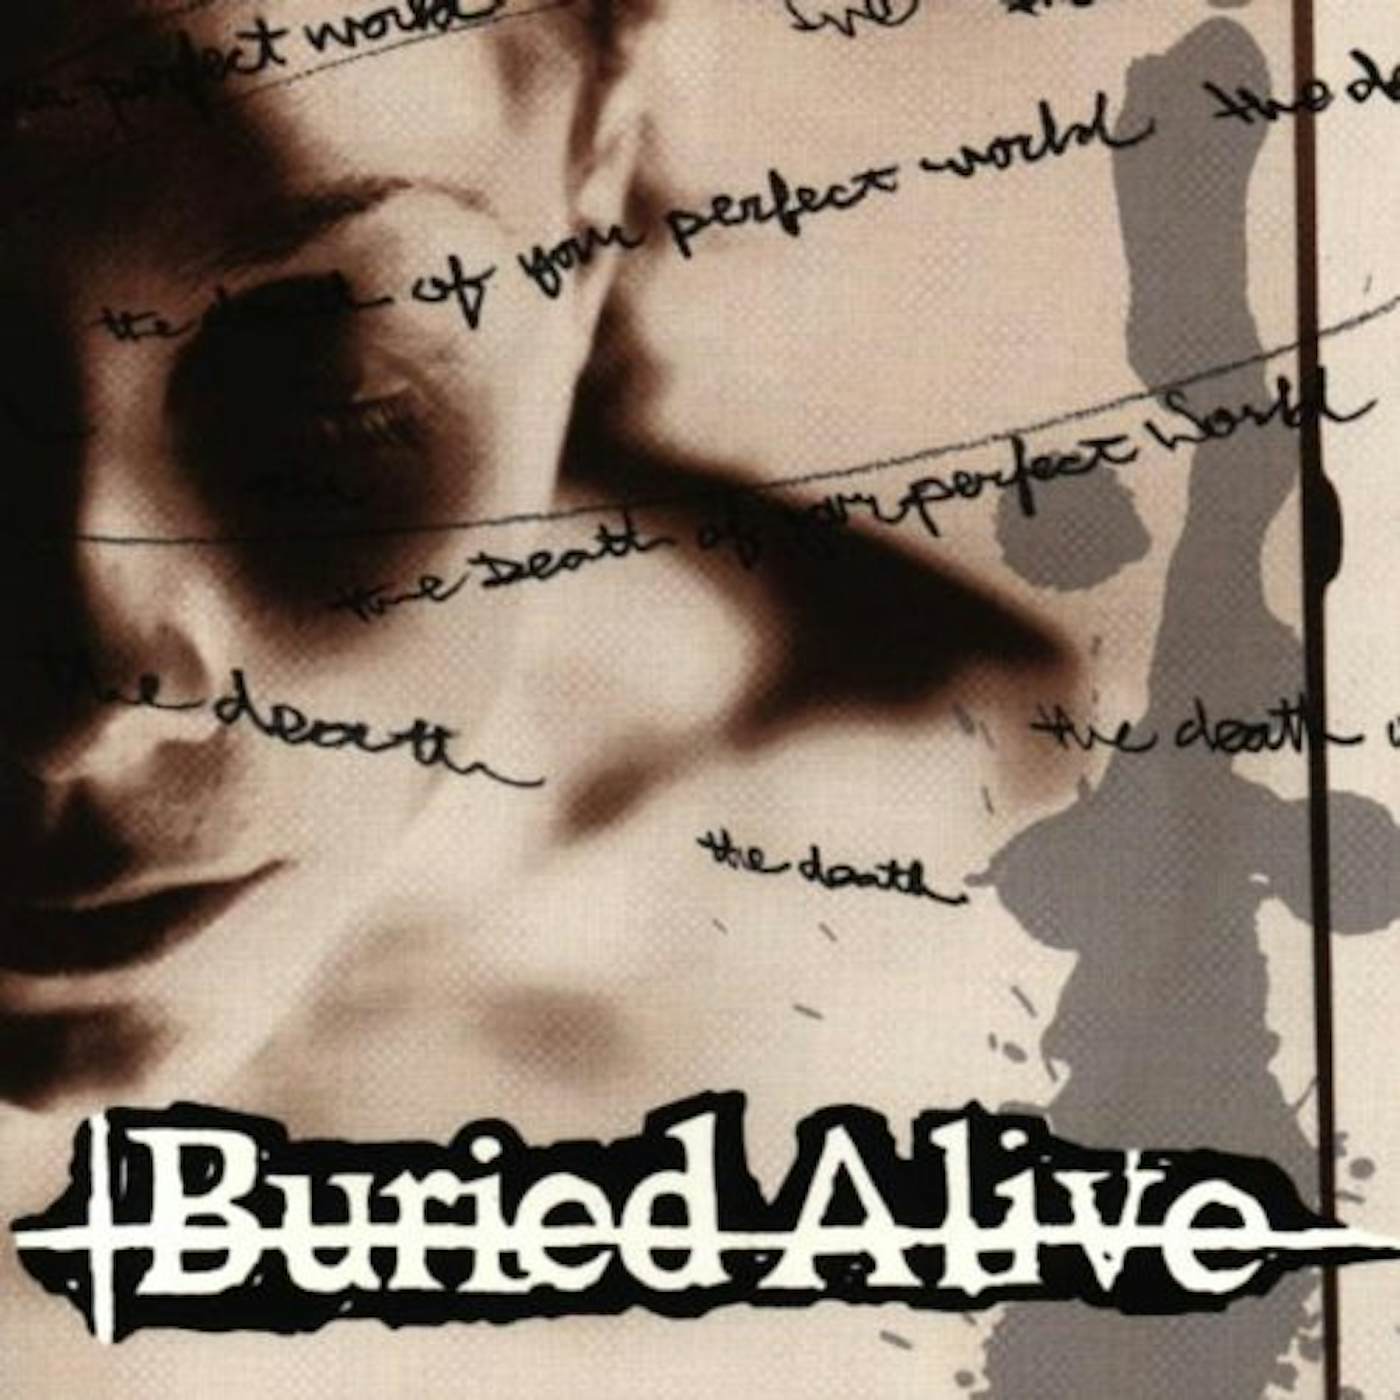 Buried Alive DEATH OF YOUR PERFECT WORLD CD